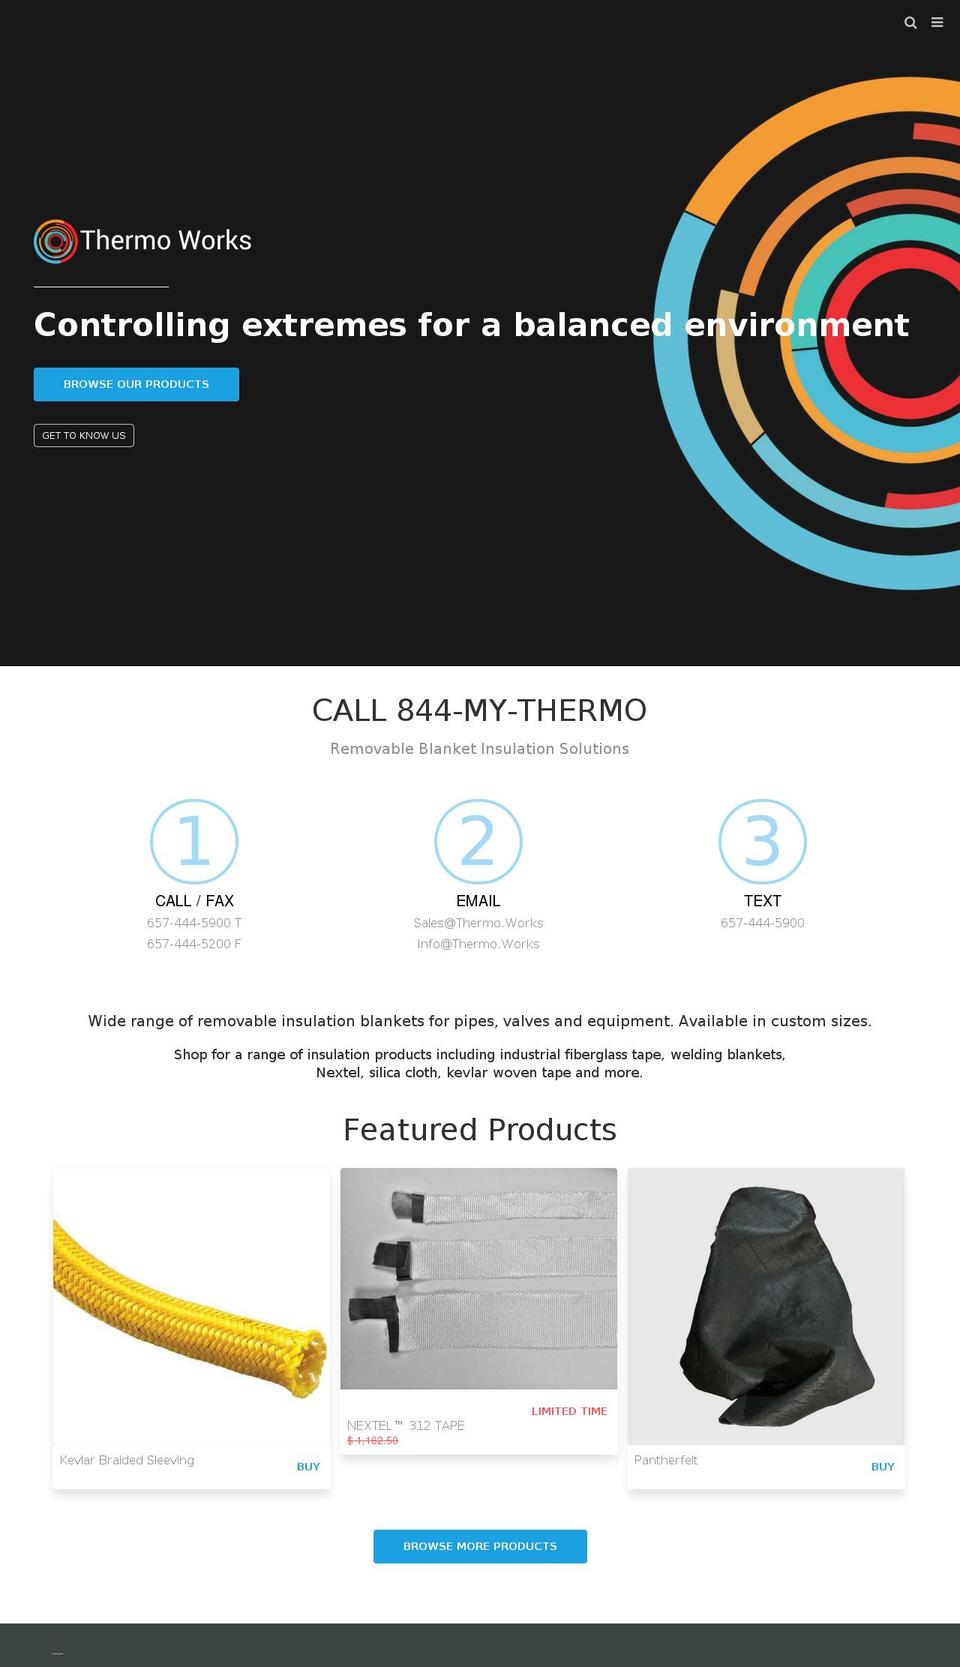 California Shopify theme site example thermo-works.com